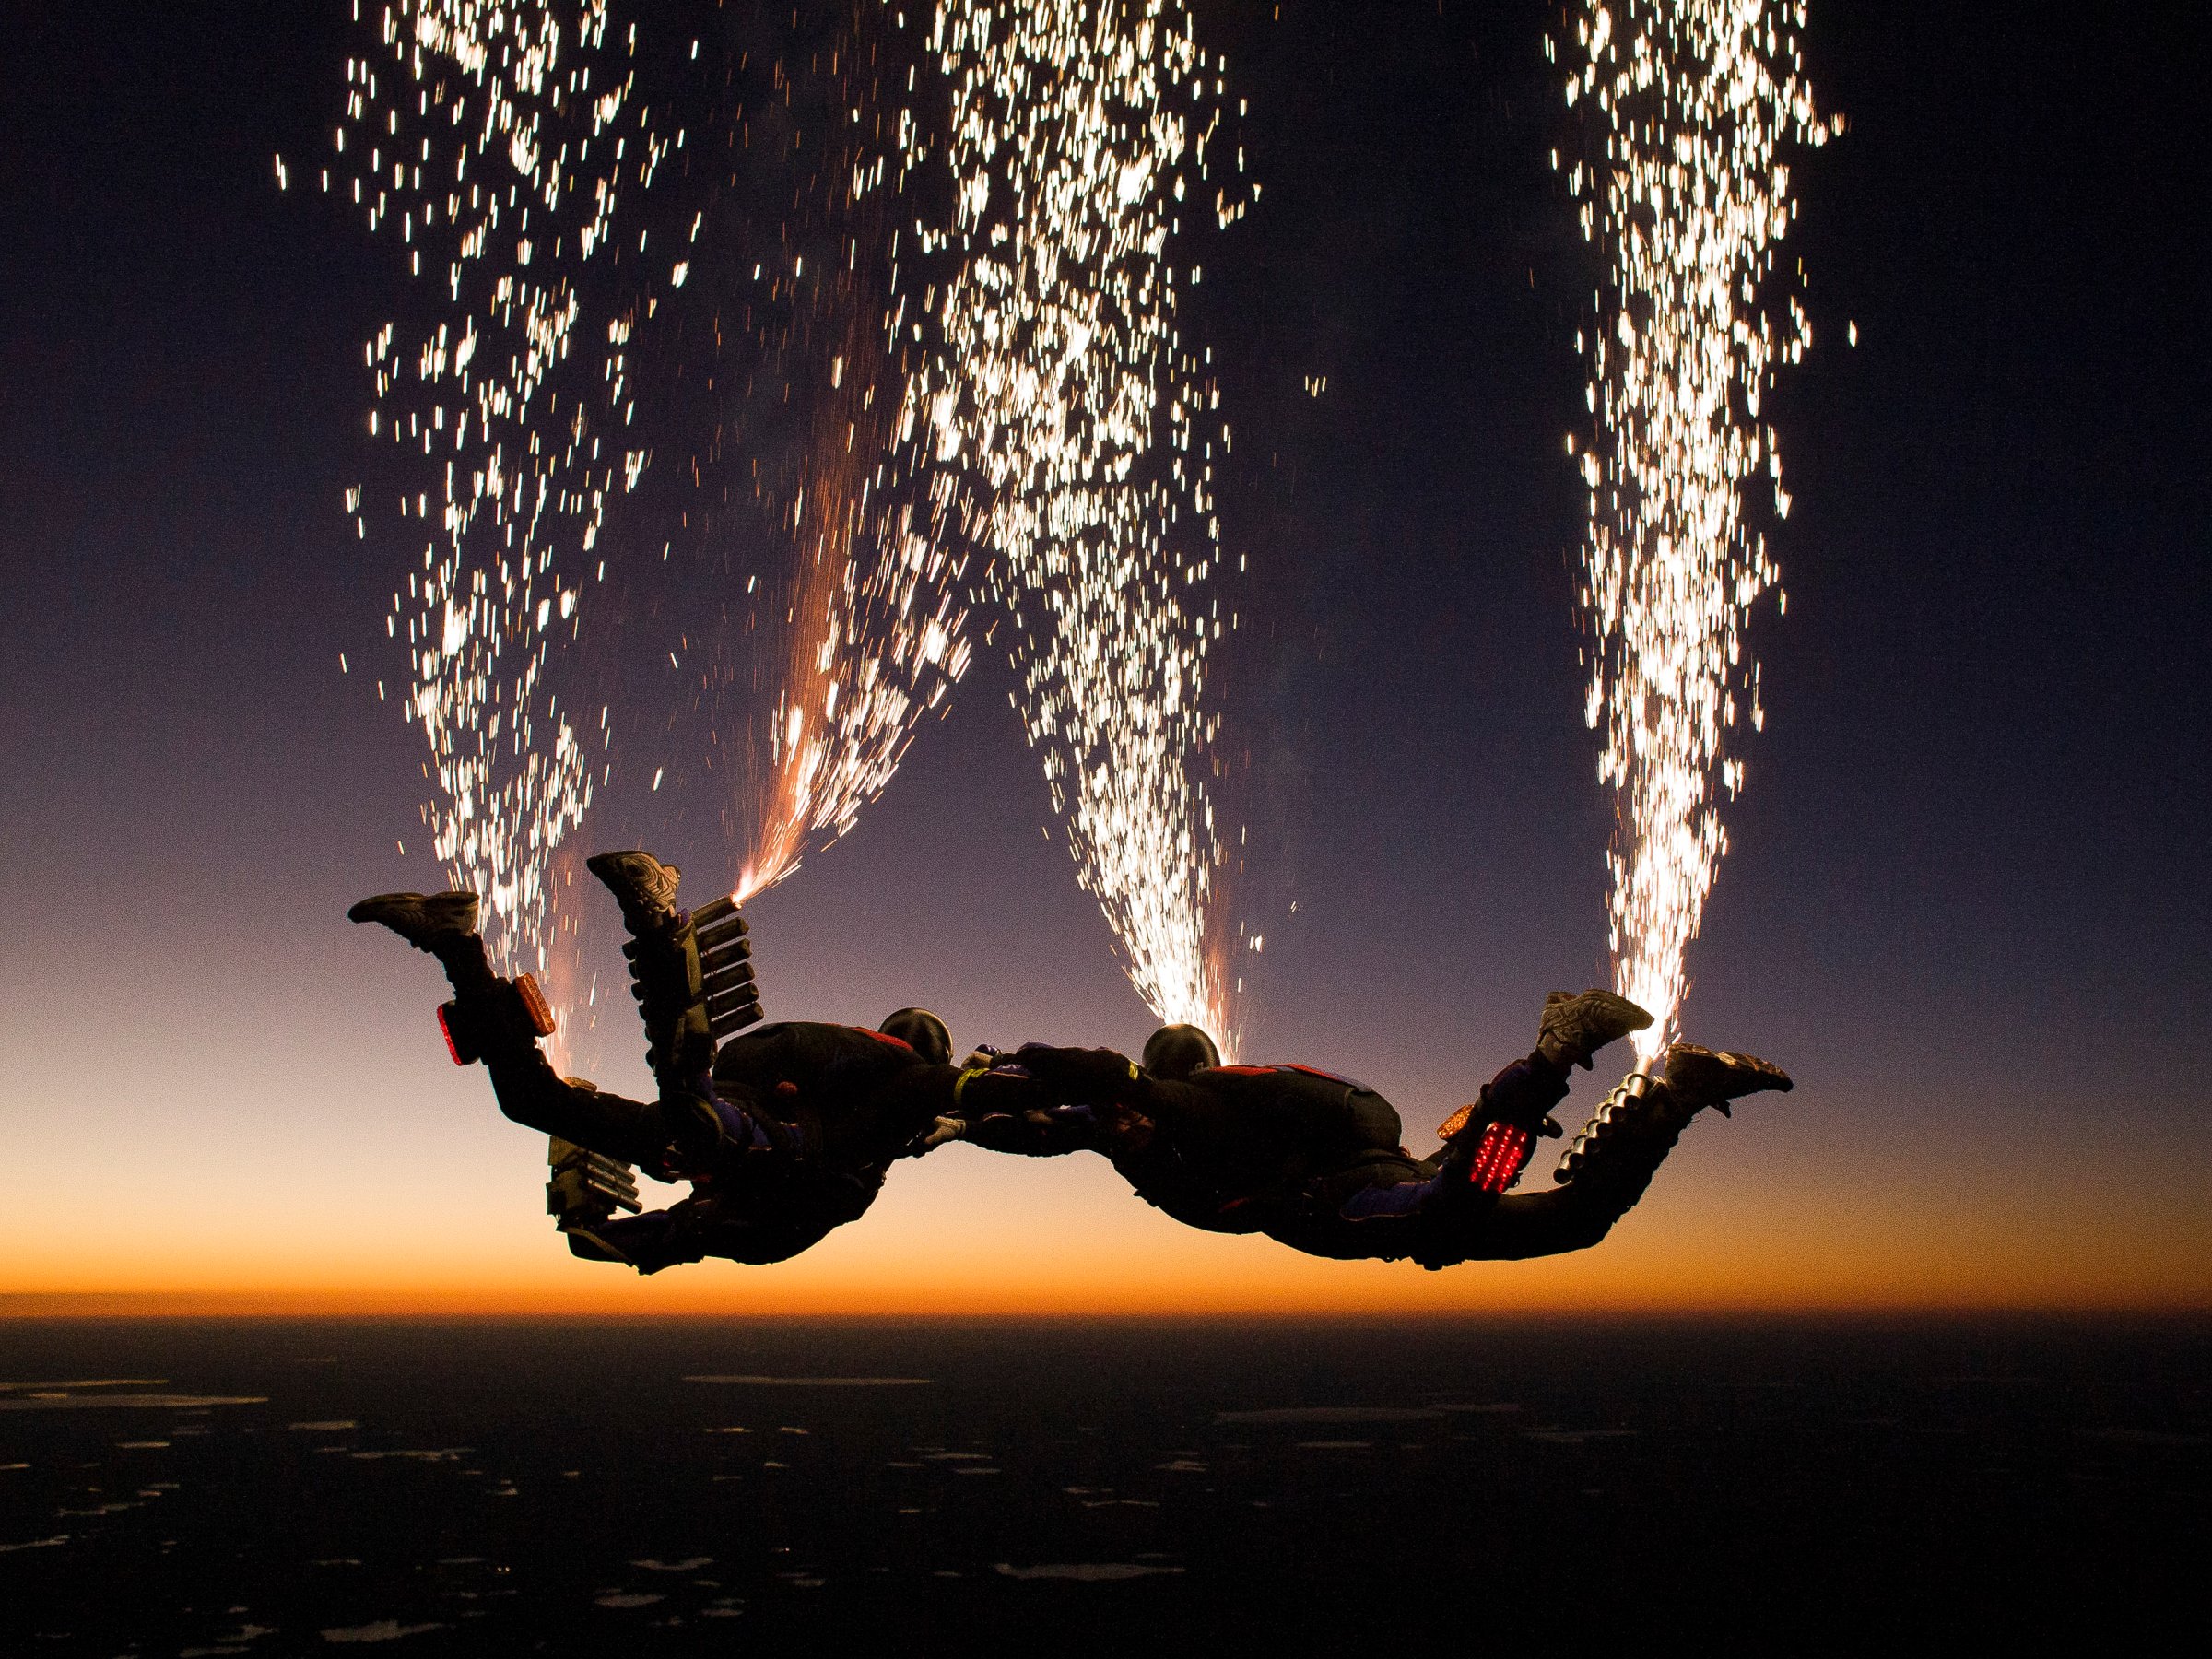 The Fastrax skydiving team set off fireworks as they jump out of the plane.